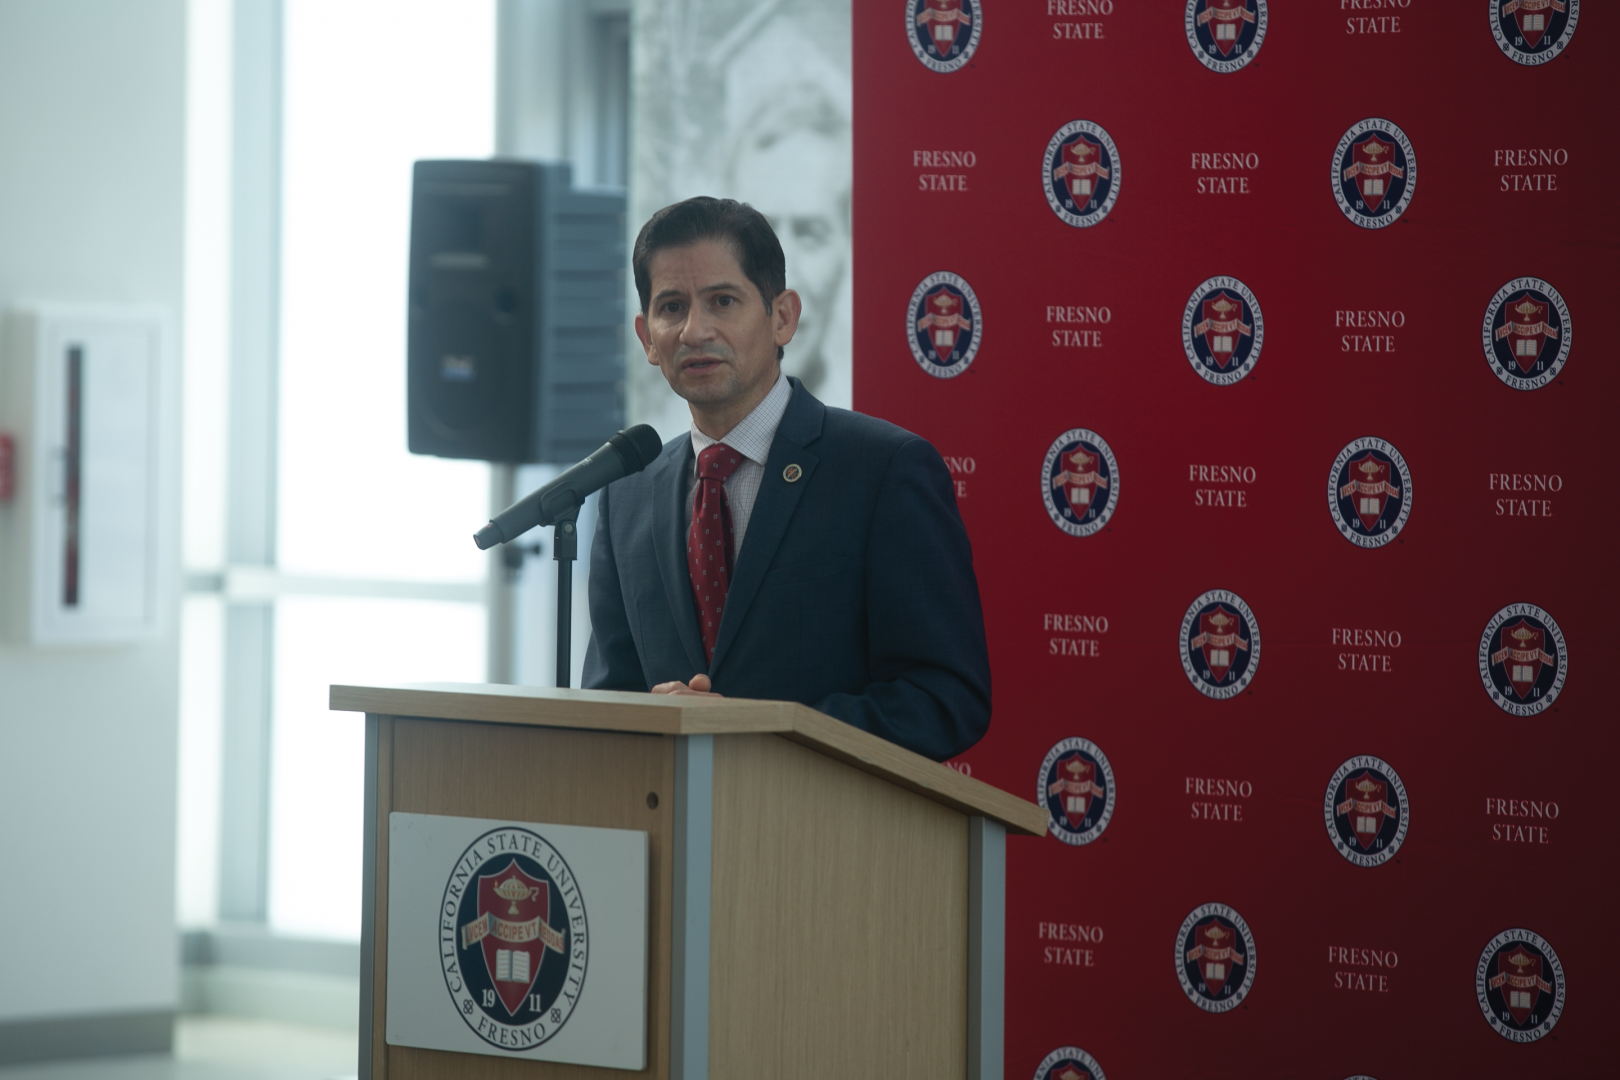 Fresno State President SaÃºl JimÃ©nez-Sandoval answered students questions and concerns in open forum on March 24 at Room 118 of the North Gym Building. (JesÃºs Cano/The Collegian)